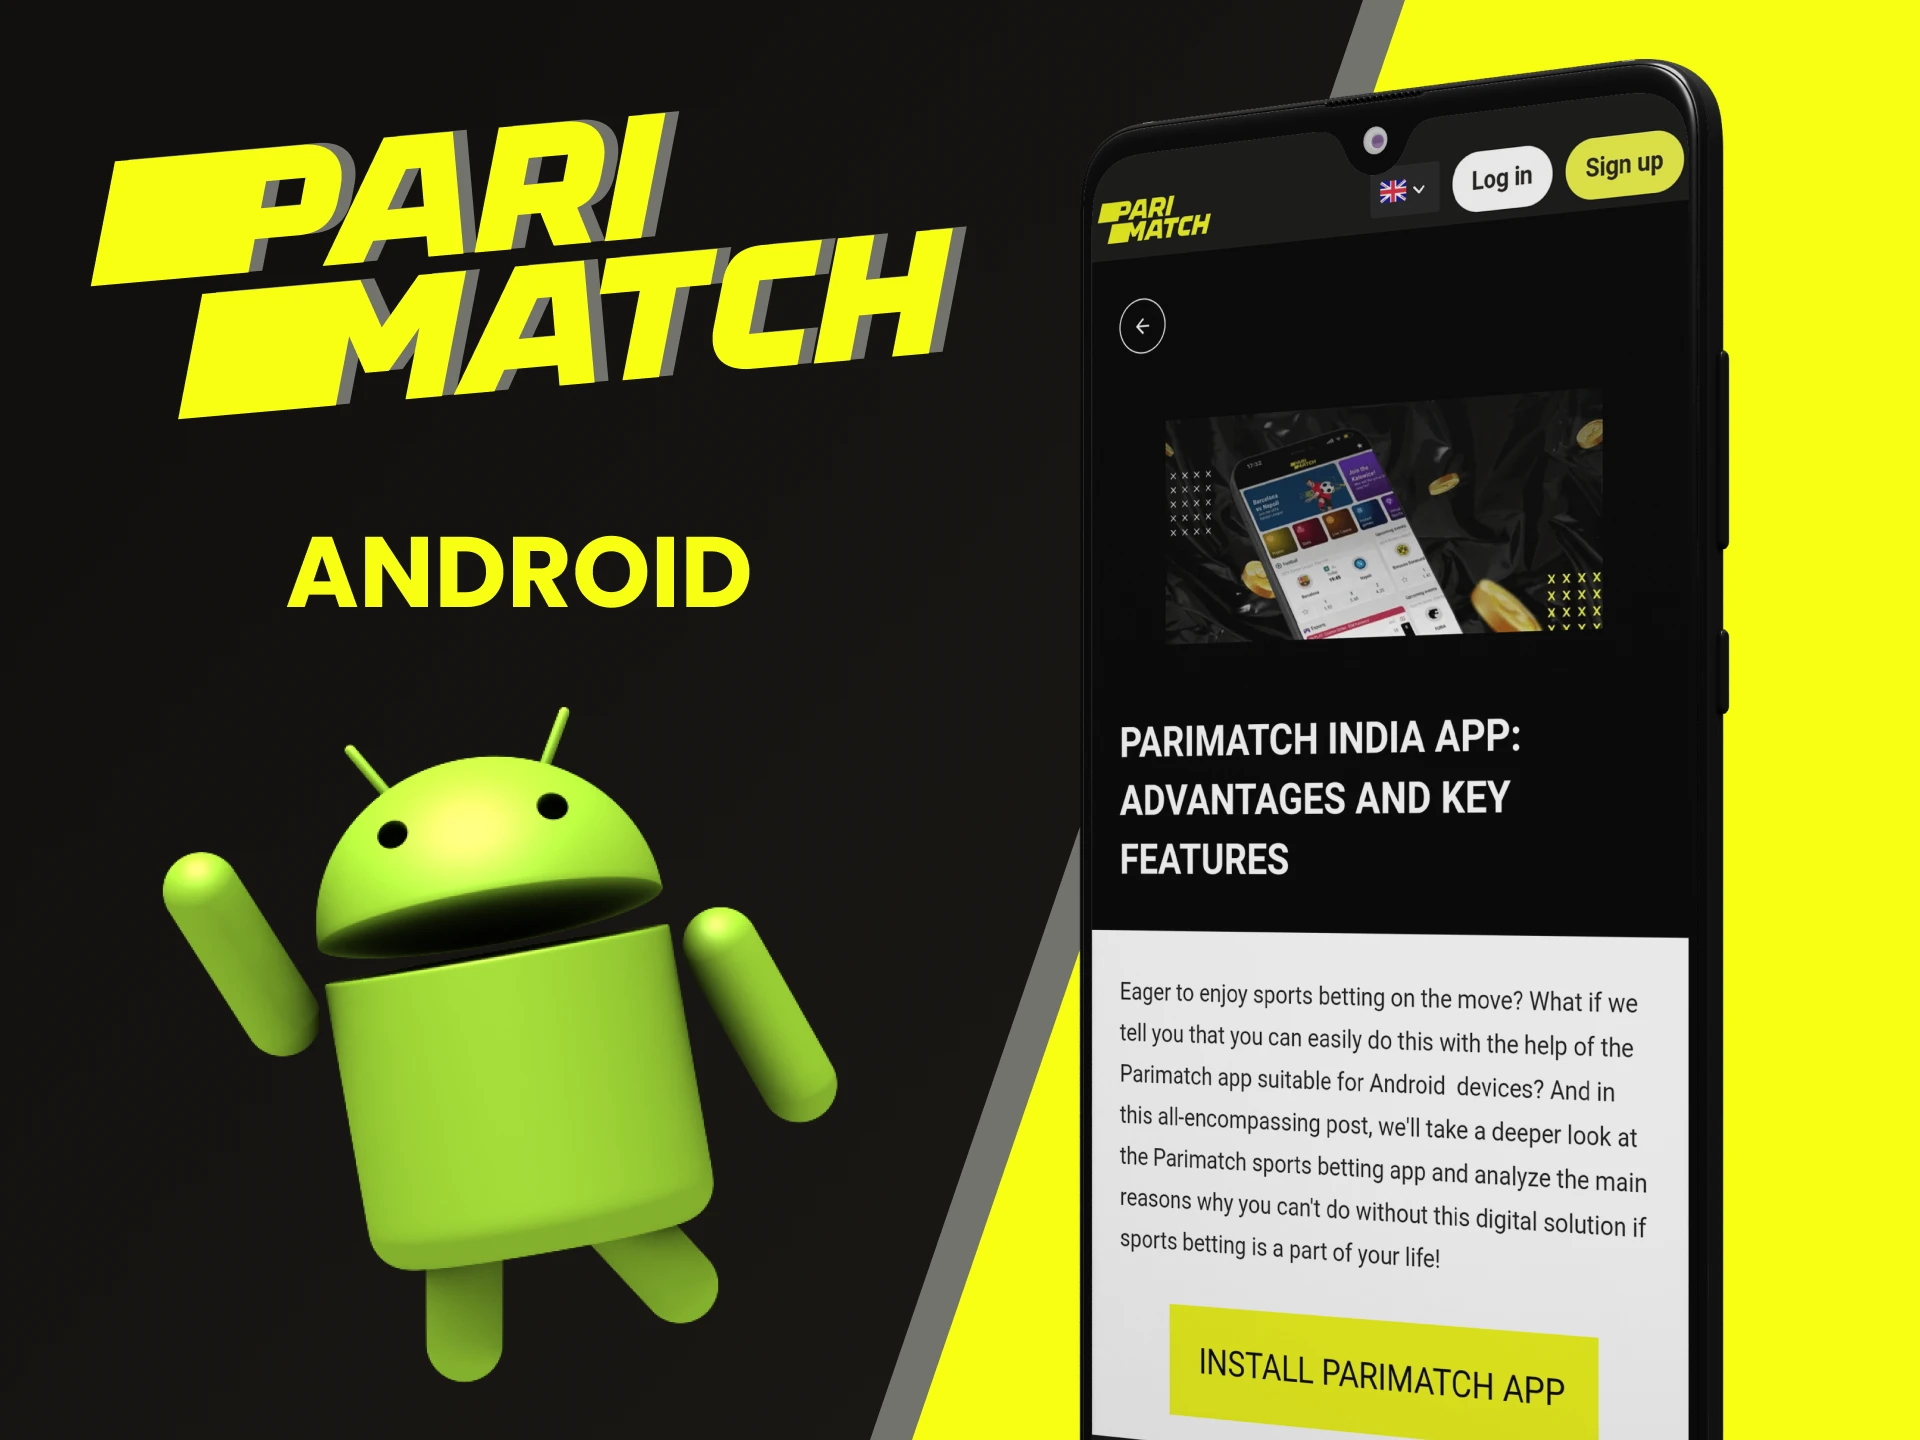 Download the Parimatch app for Android.